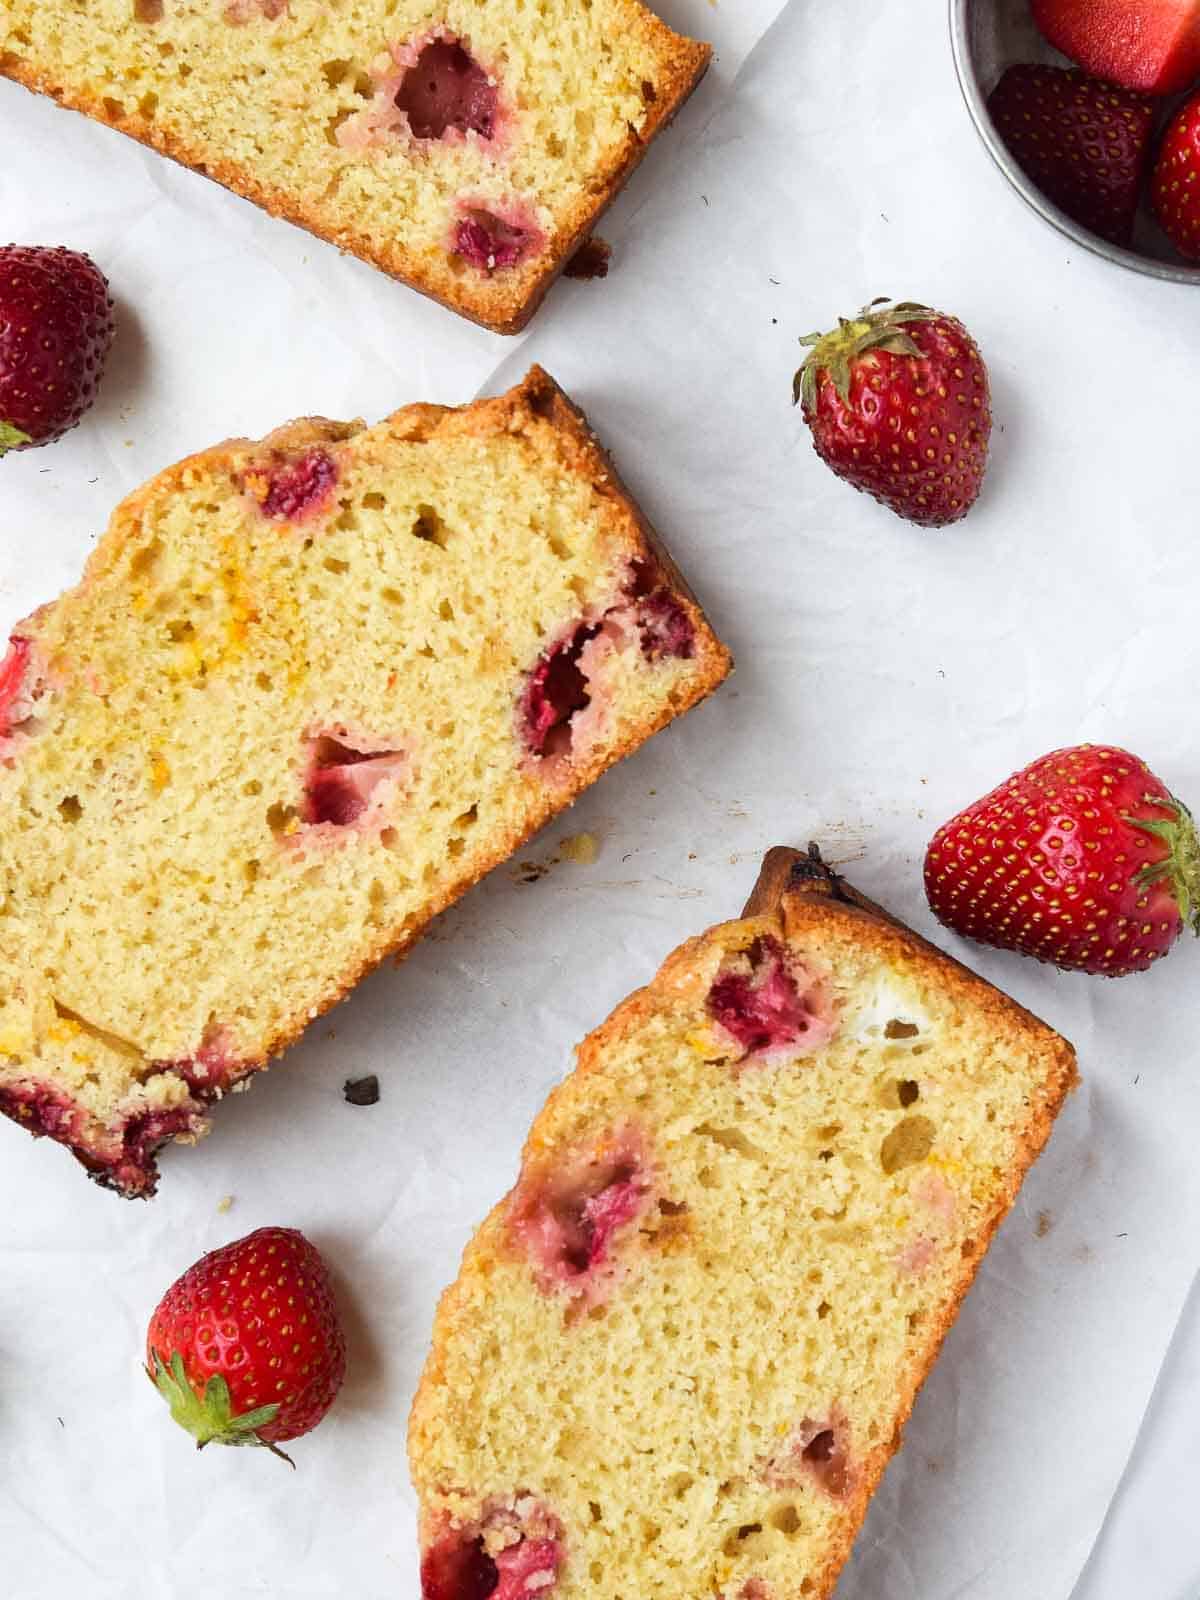 Slices of strawberry bread spread out on wax paper.